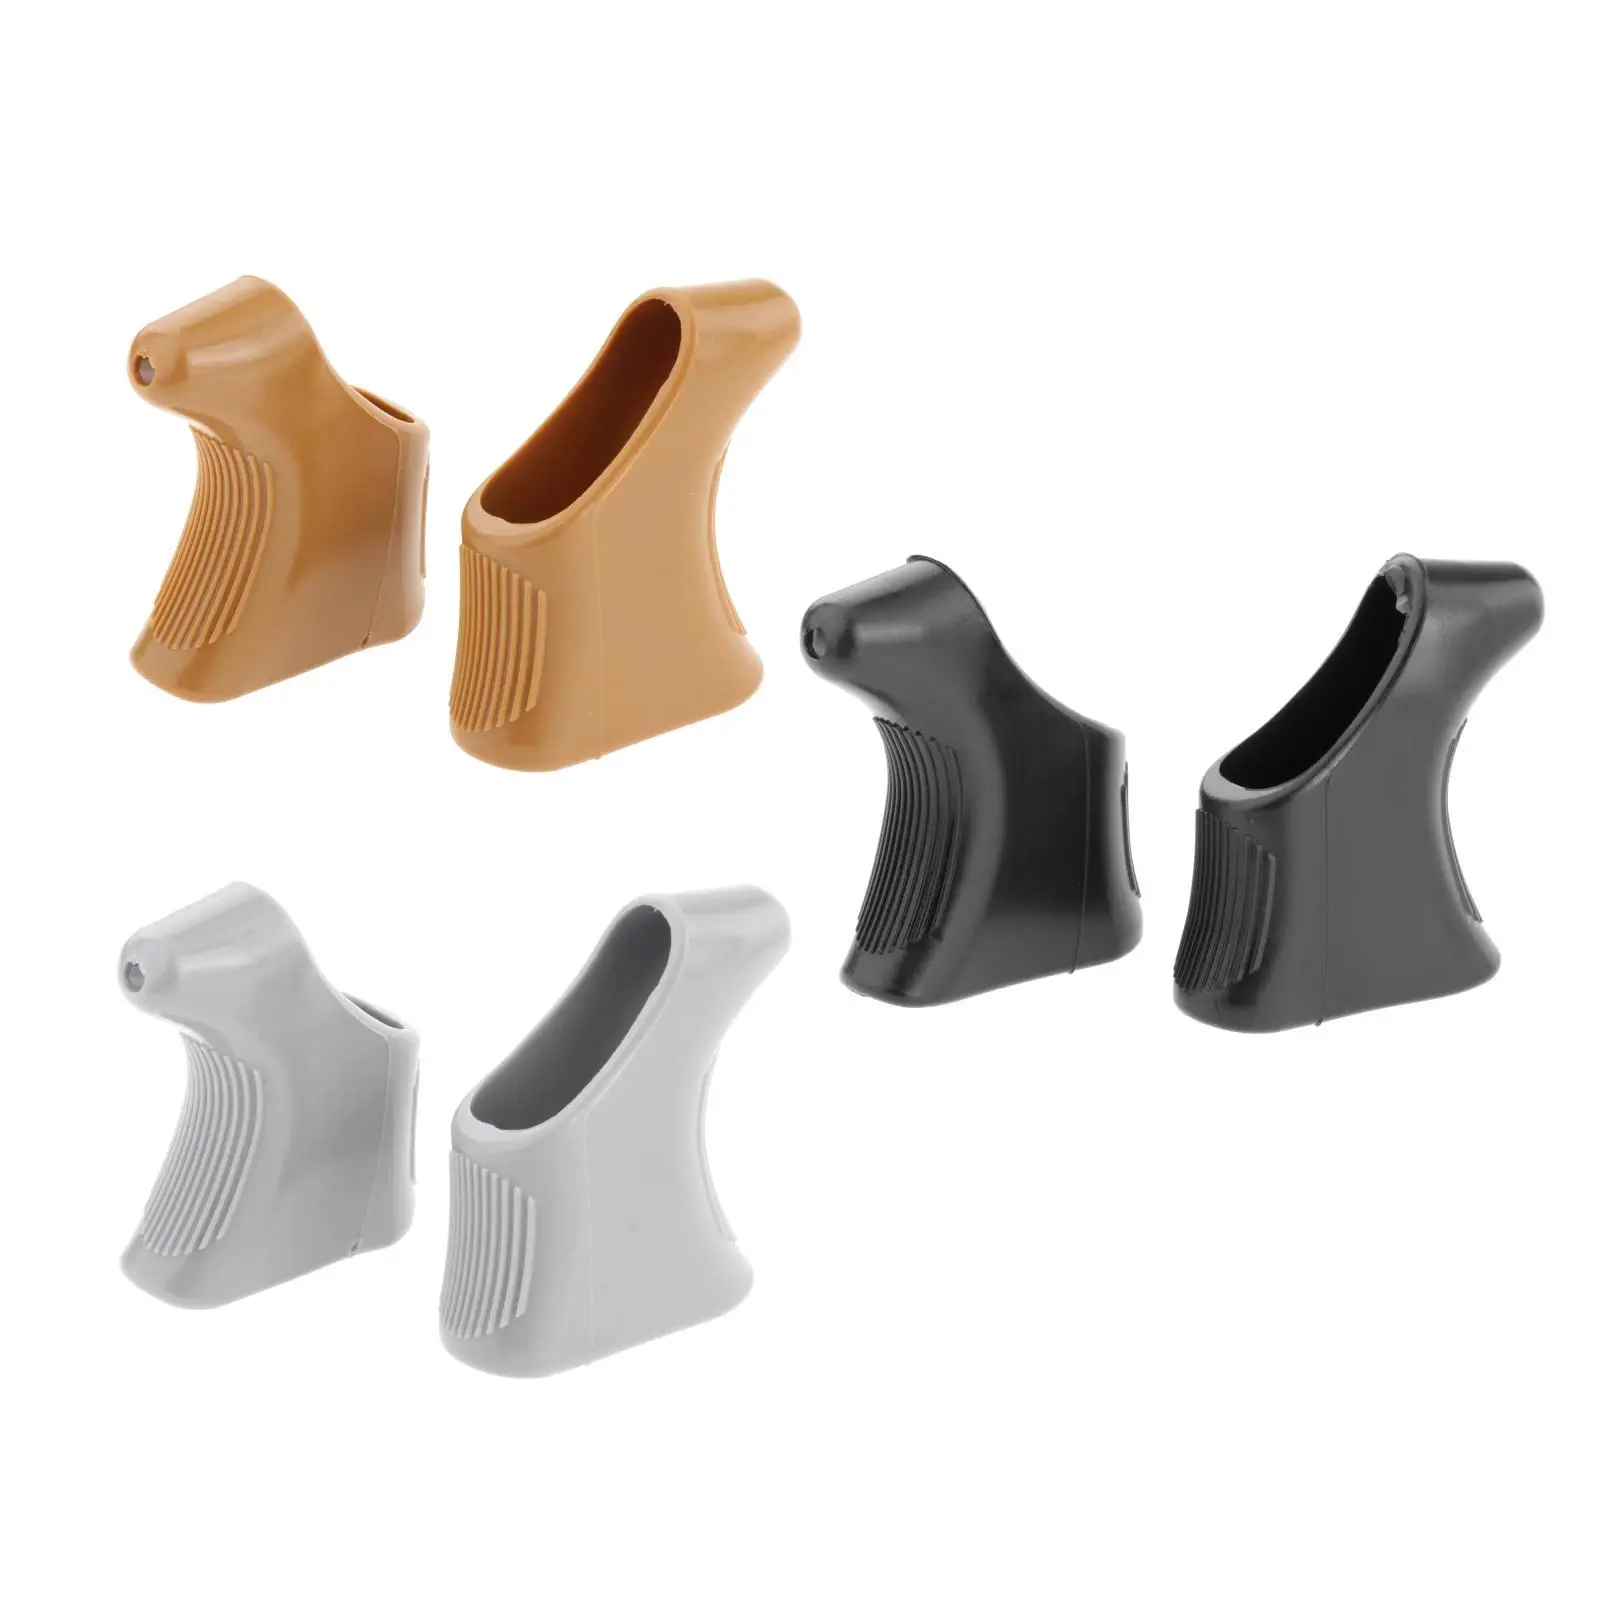 2 Pieces Brake Lever Hoods High Performance for Campagnolo Shield Bike